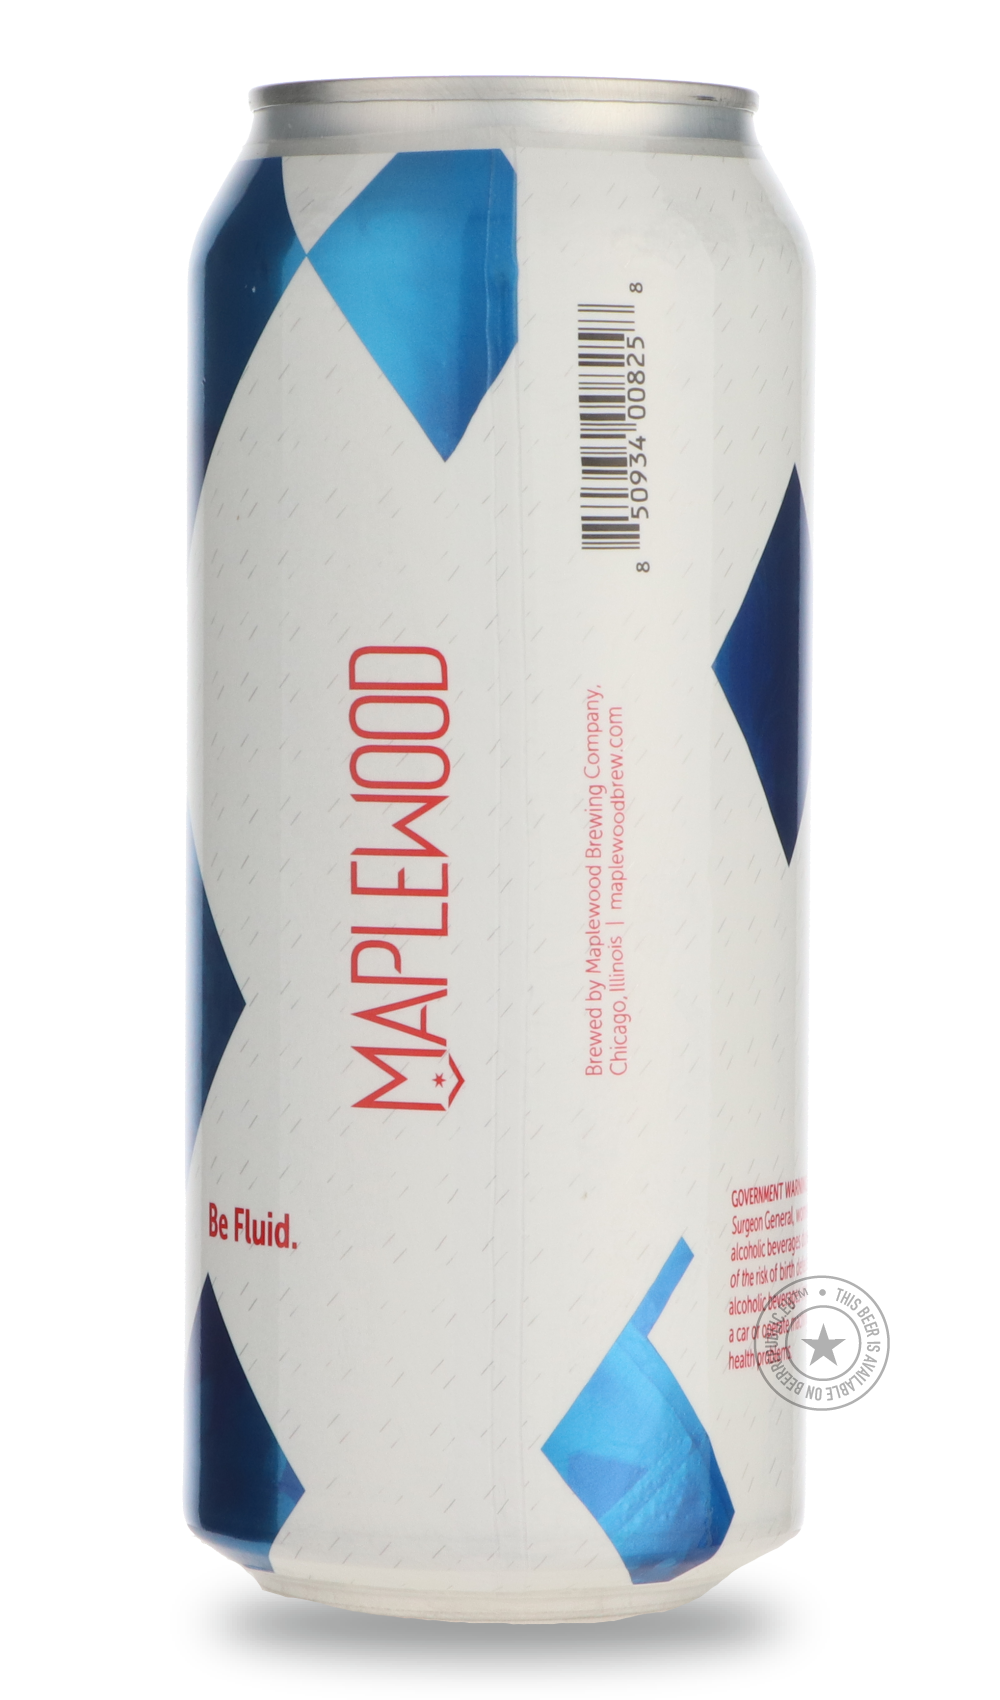 -Maplewood- Festbier-Pale- Only @ Beer Republic - The best online beer store for American & Canadian craft beer - Buy beer online from the USA and Canada - Bier online kopen - Amerikaans bier kopen - Craft beer store - Craft beer kopen - Amerikanisch bier kaufen - Bier online kaufen - Acheter biere online - IPA - Stout - Porter - New England IPA - Hazy IPA - Imperial Stout - Barrel Aged - Barrel Aged Imperial Stout - Brown - Dark beer - Blond - Blonde - Pilsner - Lager - Wheat - Weizen - Amber - Barley Wine